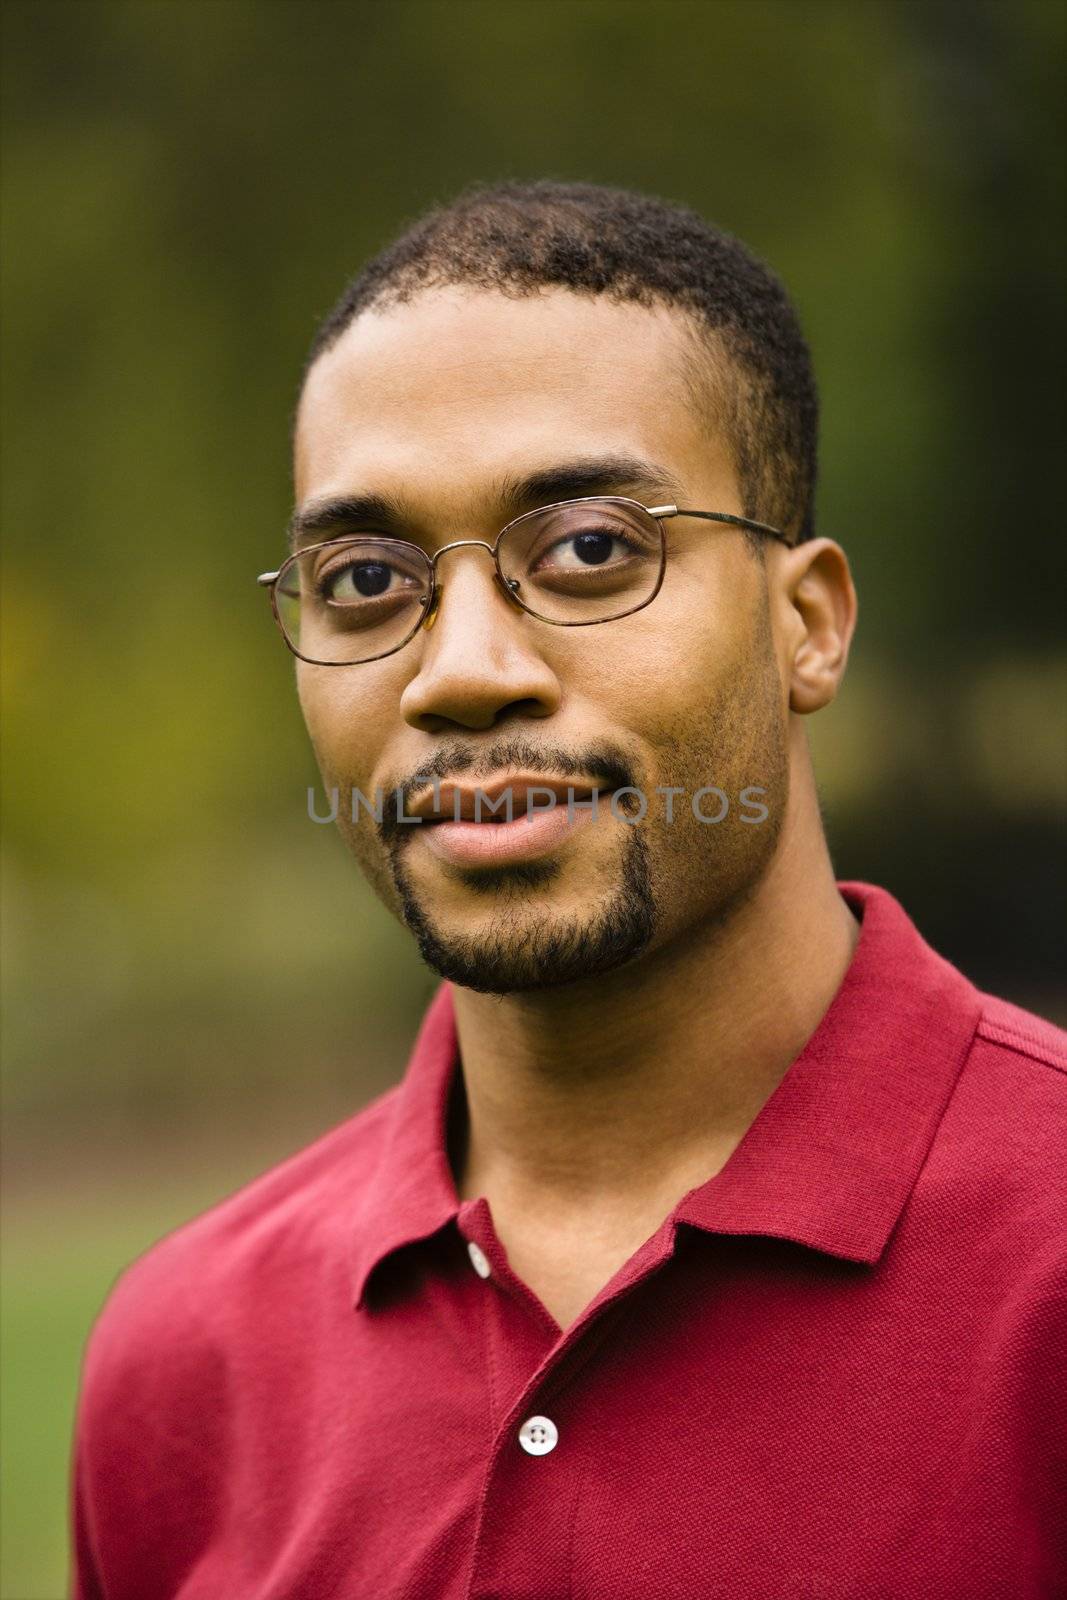 Head and shoulder portrait of African American adult man.